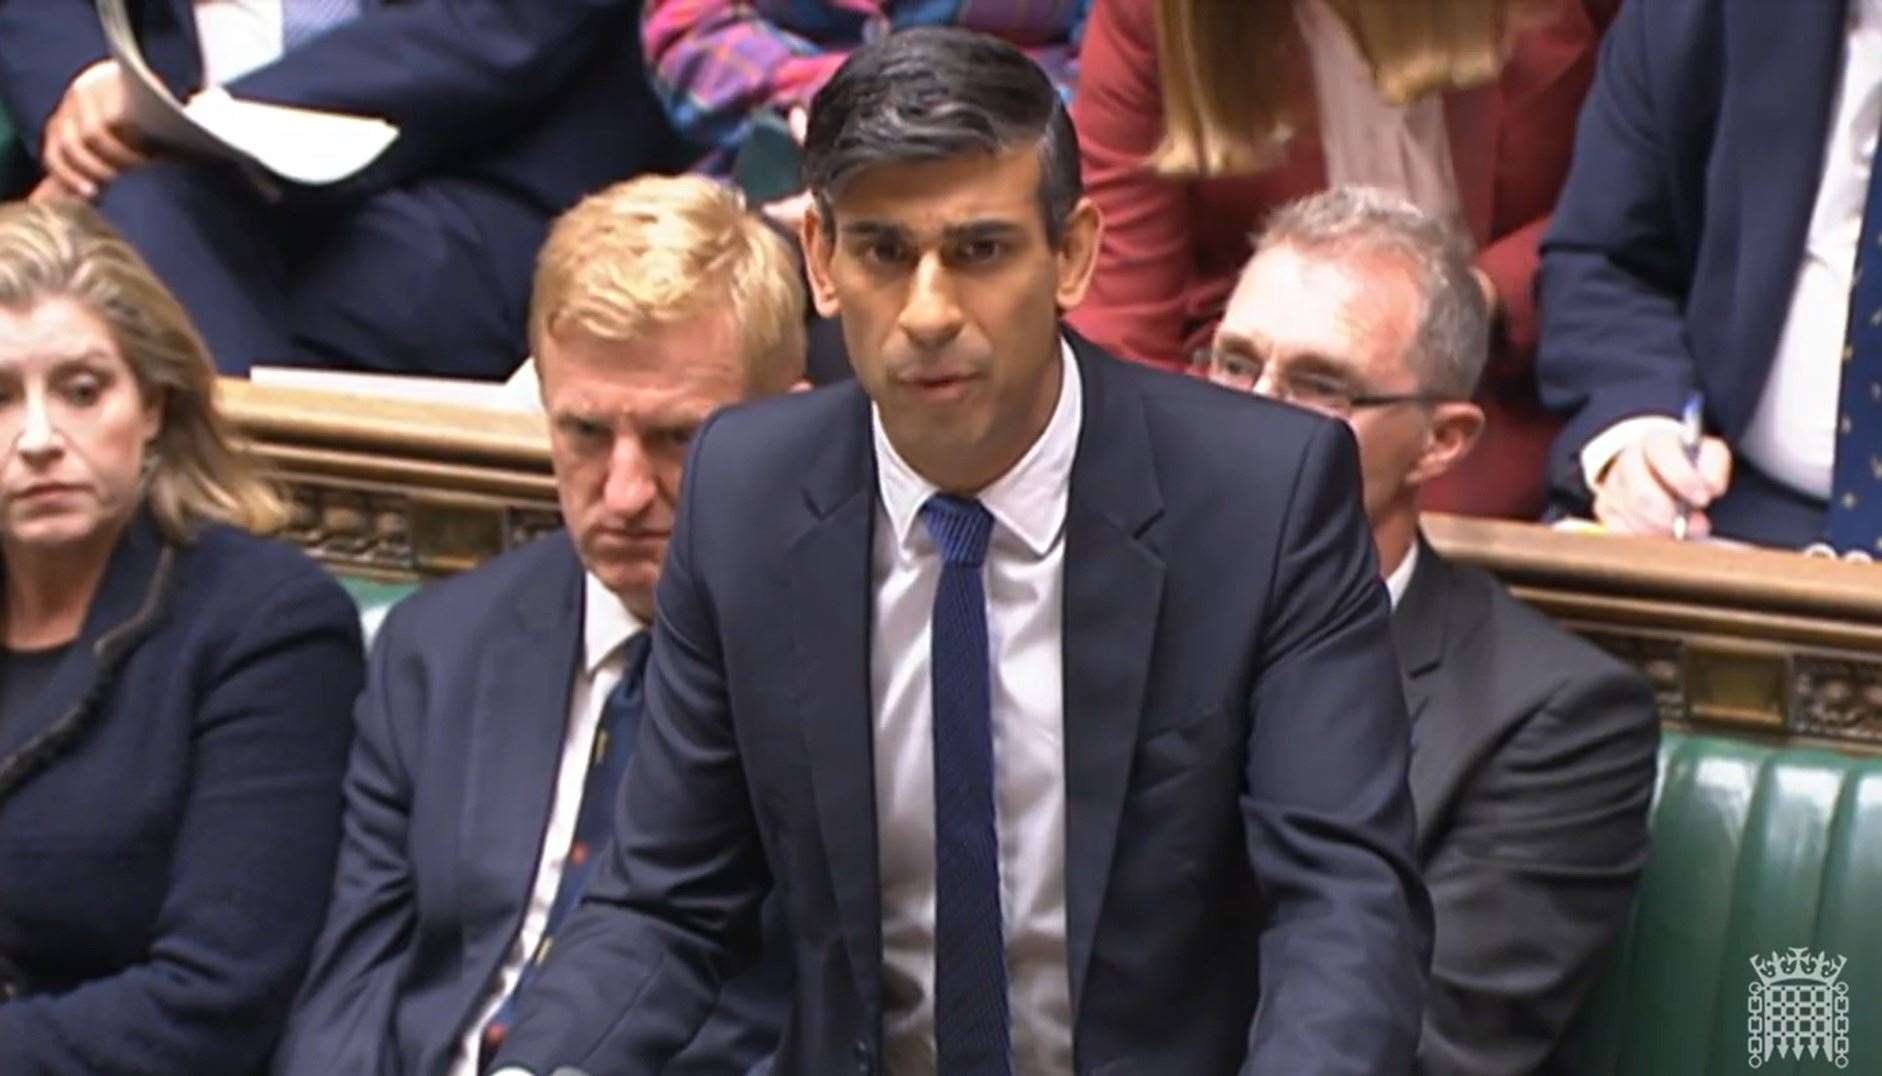 Prime Minister Rishi Sunak speaks during Prime Minister’s Questions in the Commons (House of Commons/UK Parliament/PA)